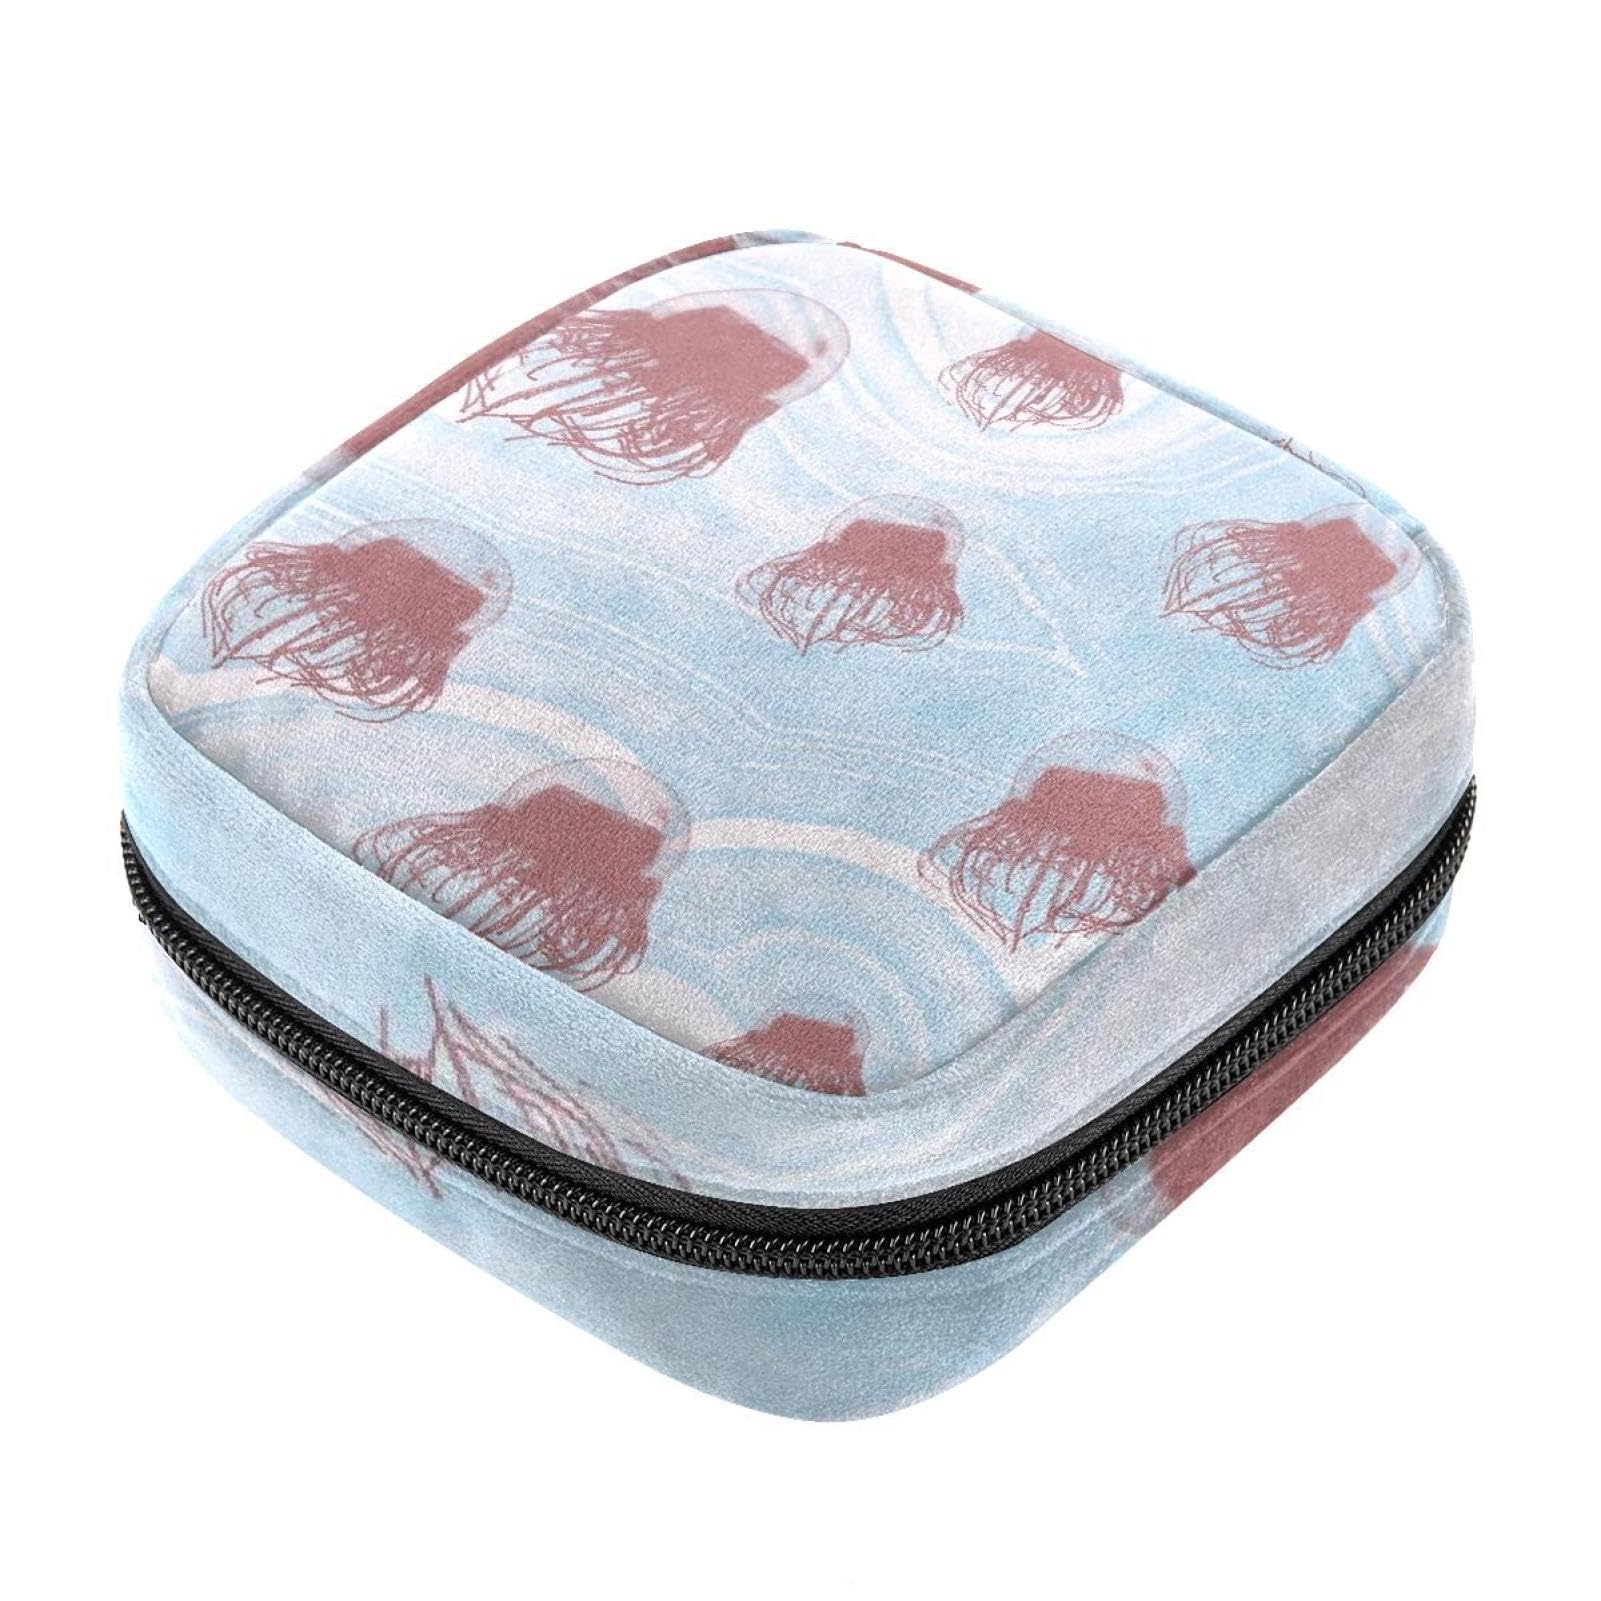 Whale Stripe Ocean,Period Pouch Portable,Tampon Storage Bag,Tampon Holder  for Purse Feminine Product Organizer : Health & Household 